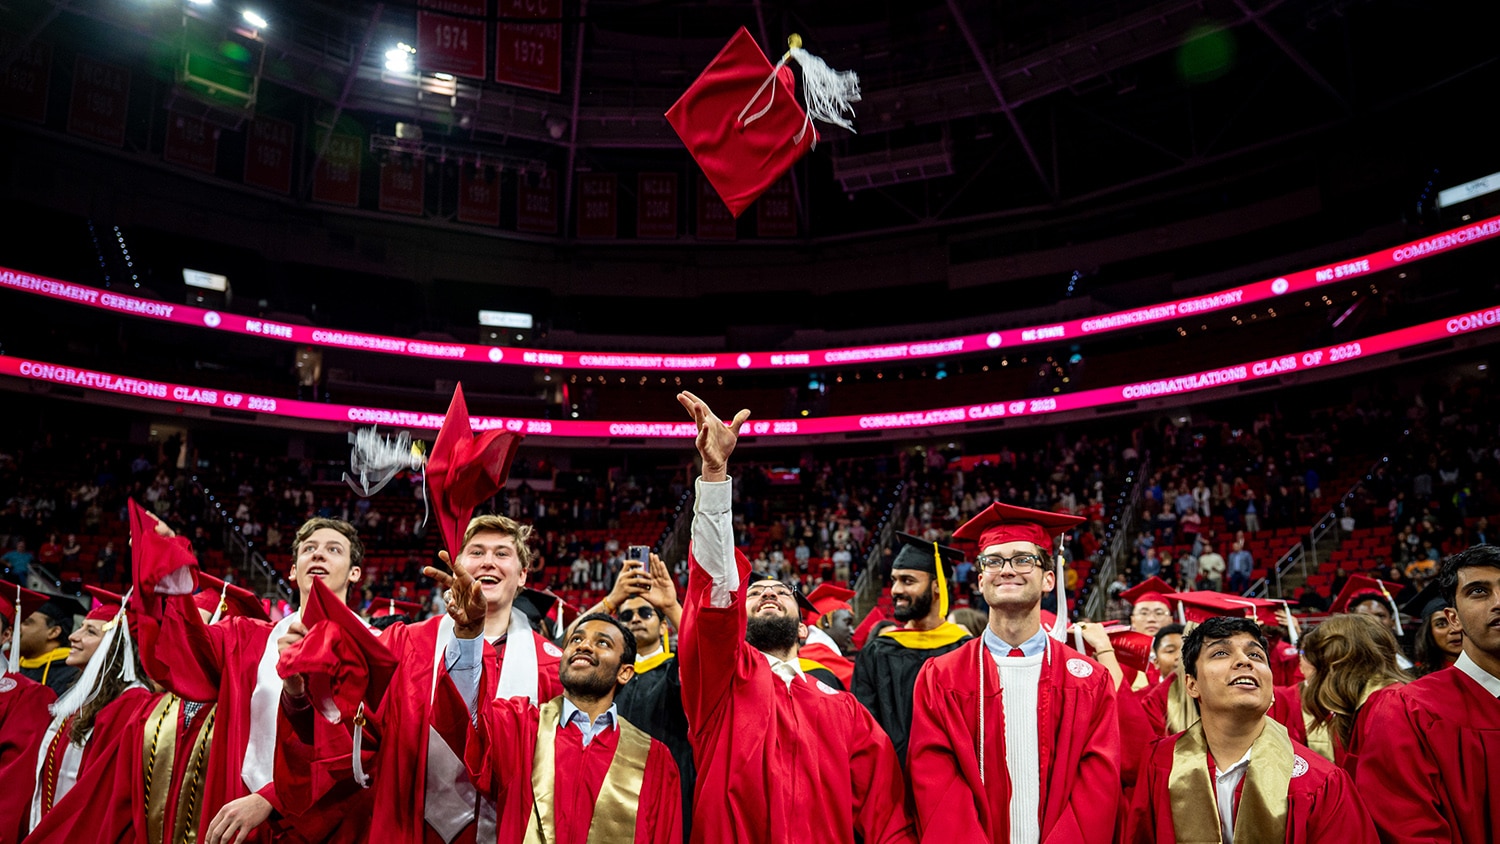 Students smile and toss their graduation caps in the air during commencement.